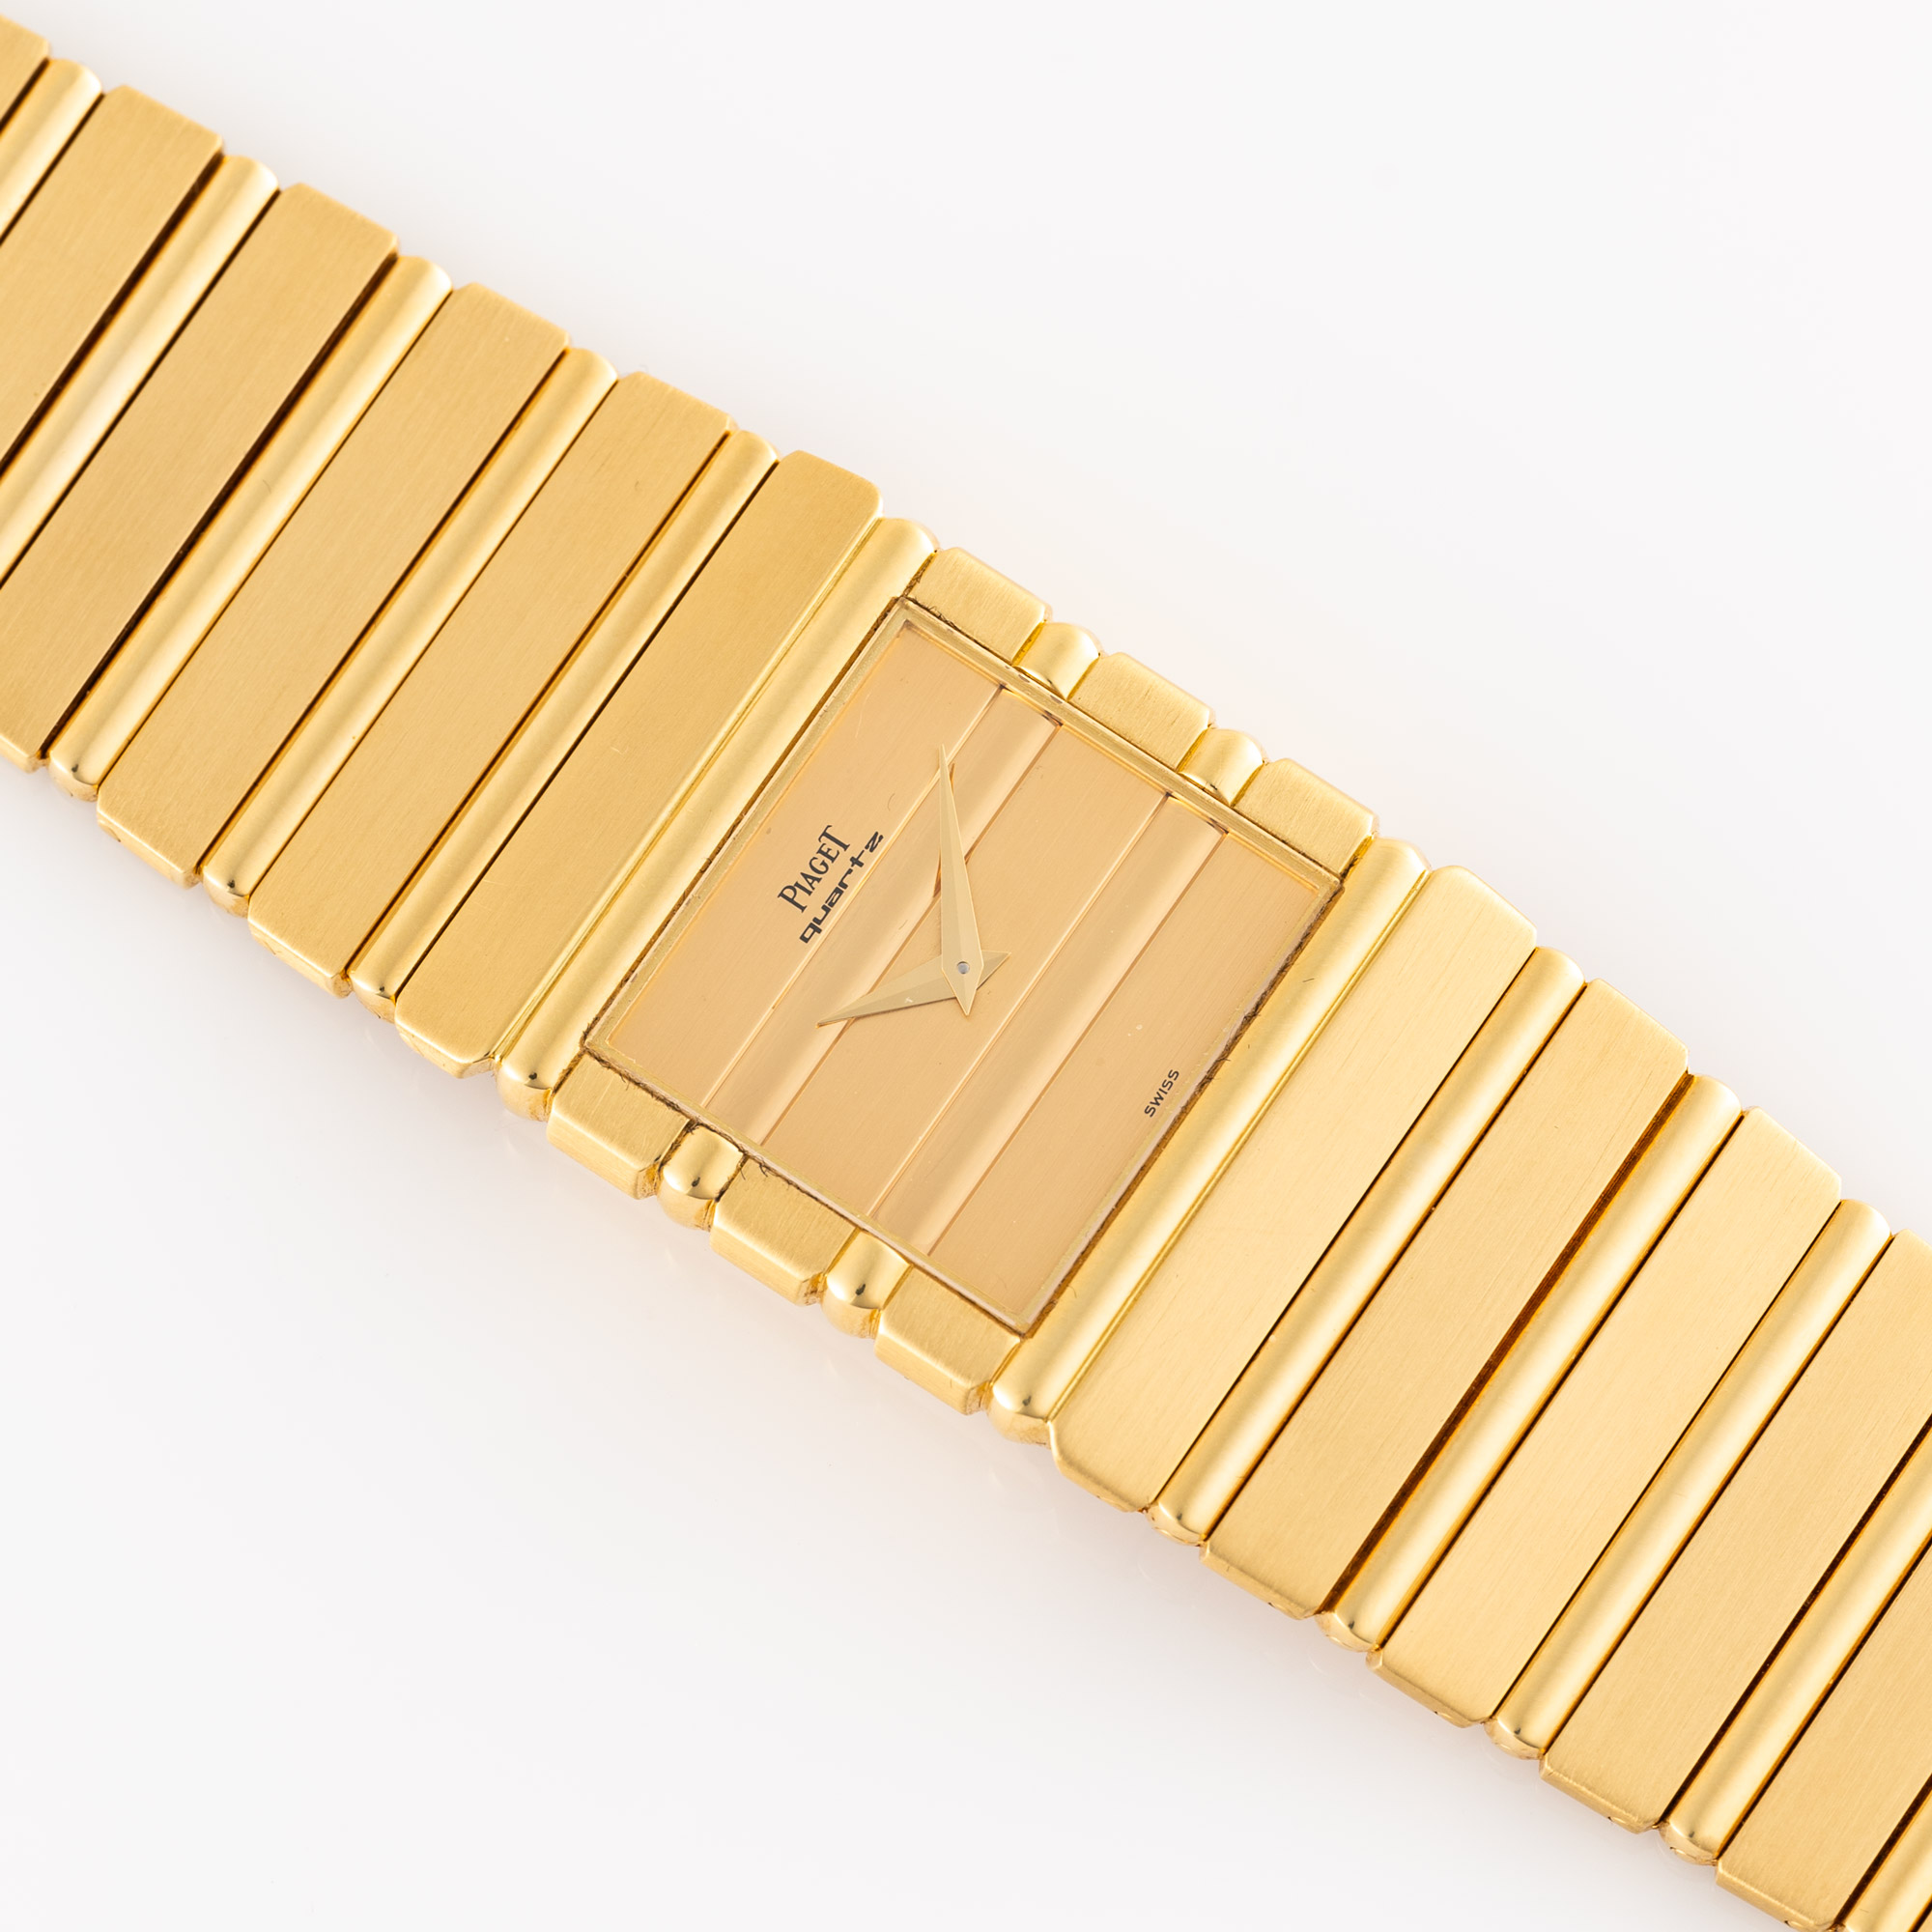 A GENTLEMAN'S SIZE 18K SOLID GOLD PIAGET POLO BRACELET WATCH CIRCA 1970s, REF. 7131 FIRST SERIES - Image 3 of 8